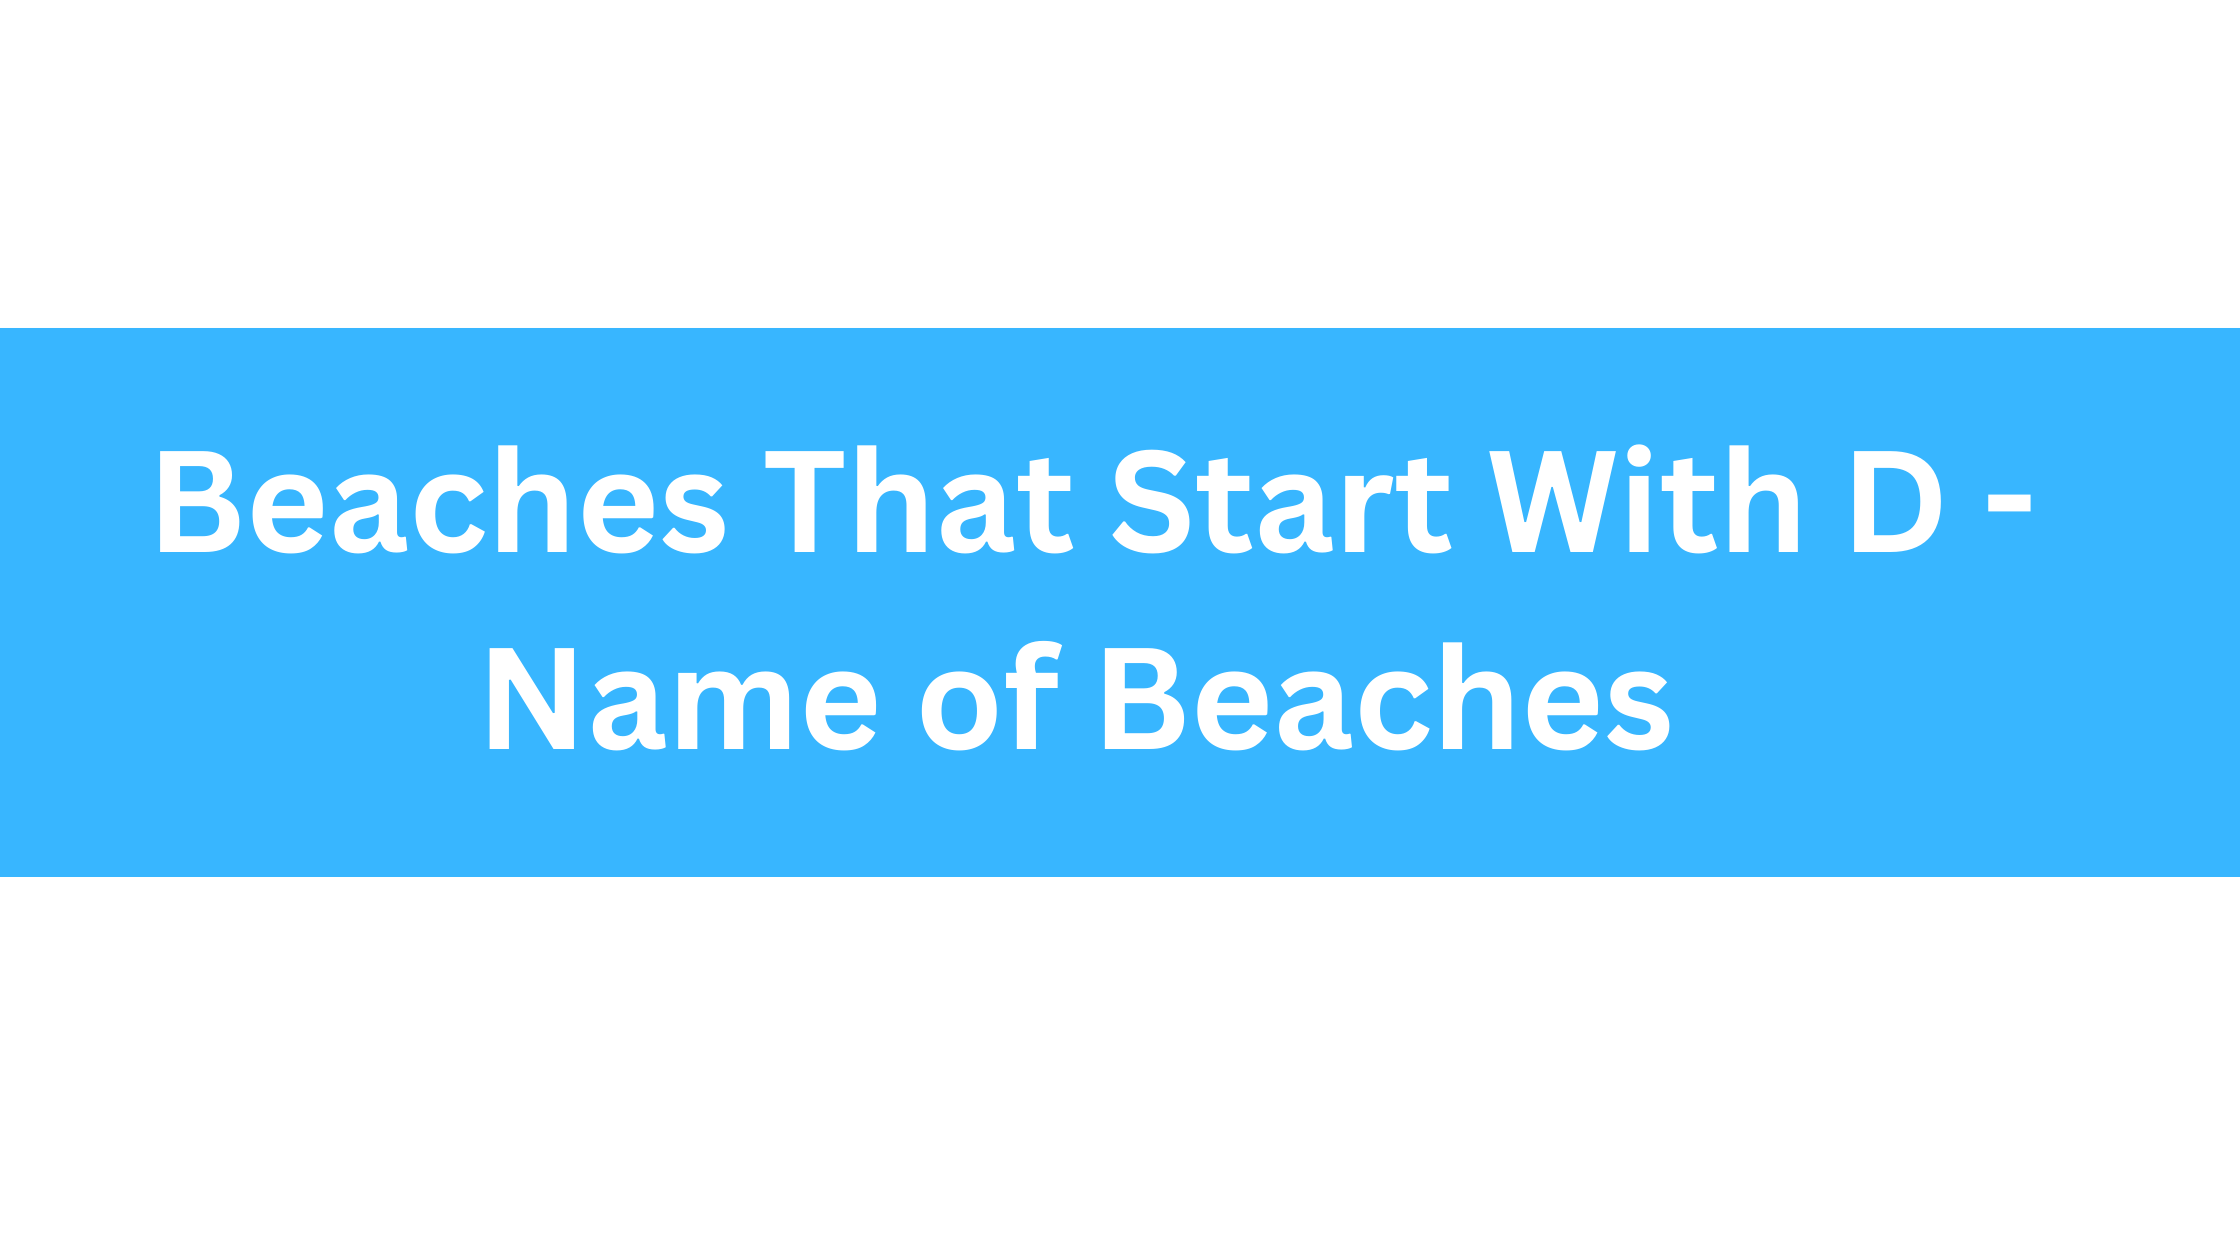 Beaches That Start With D